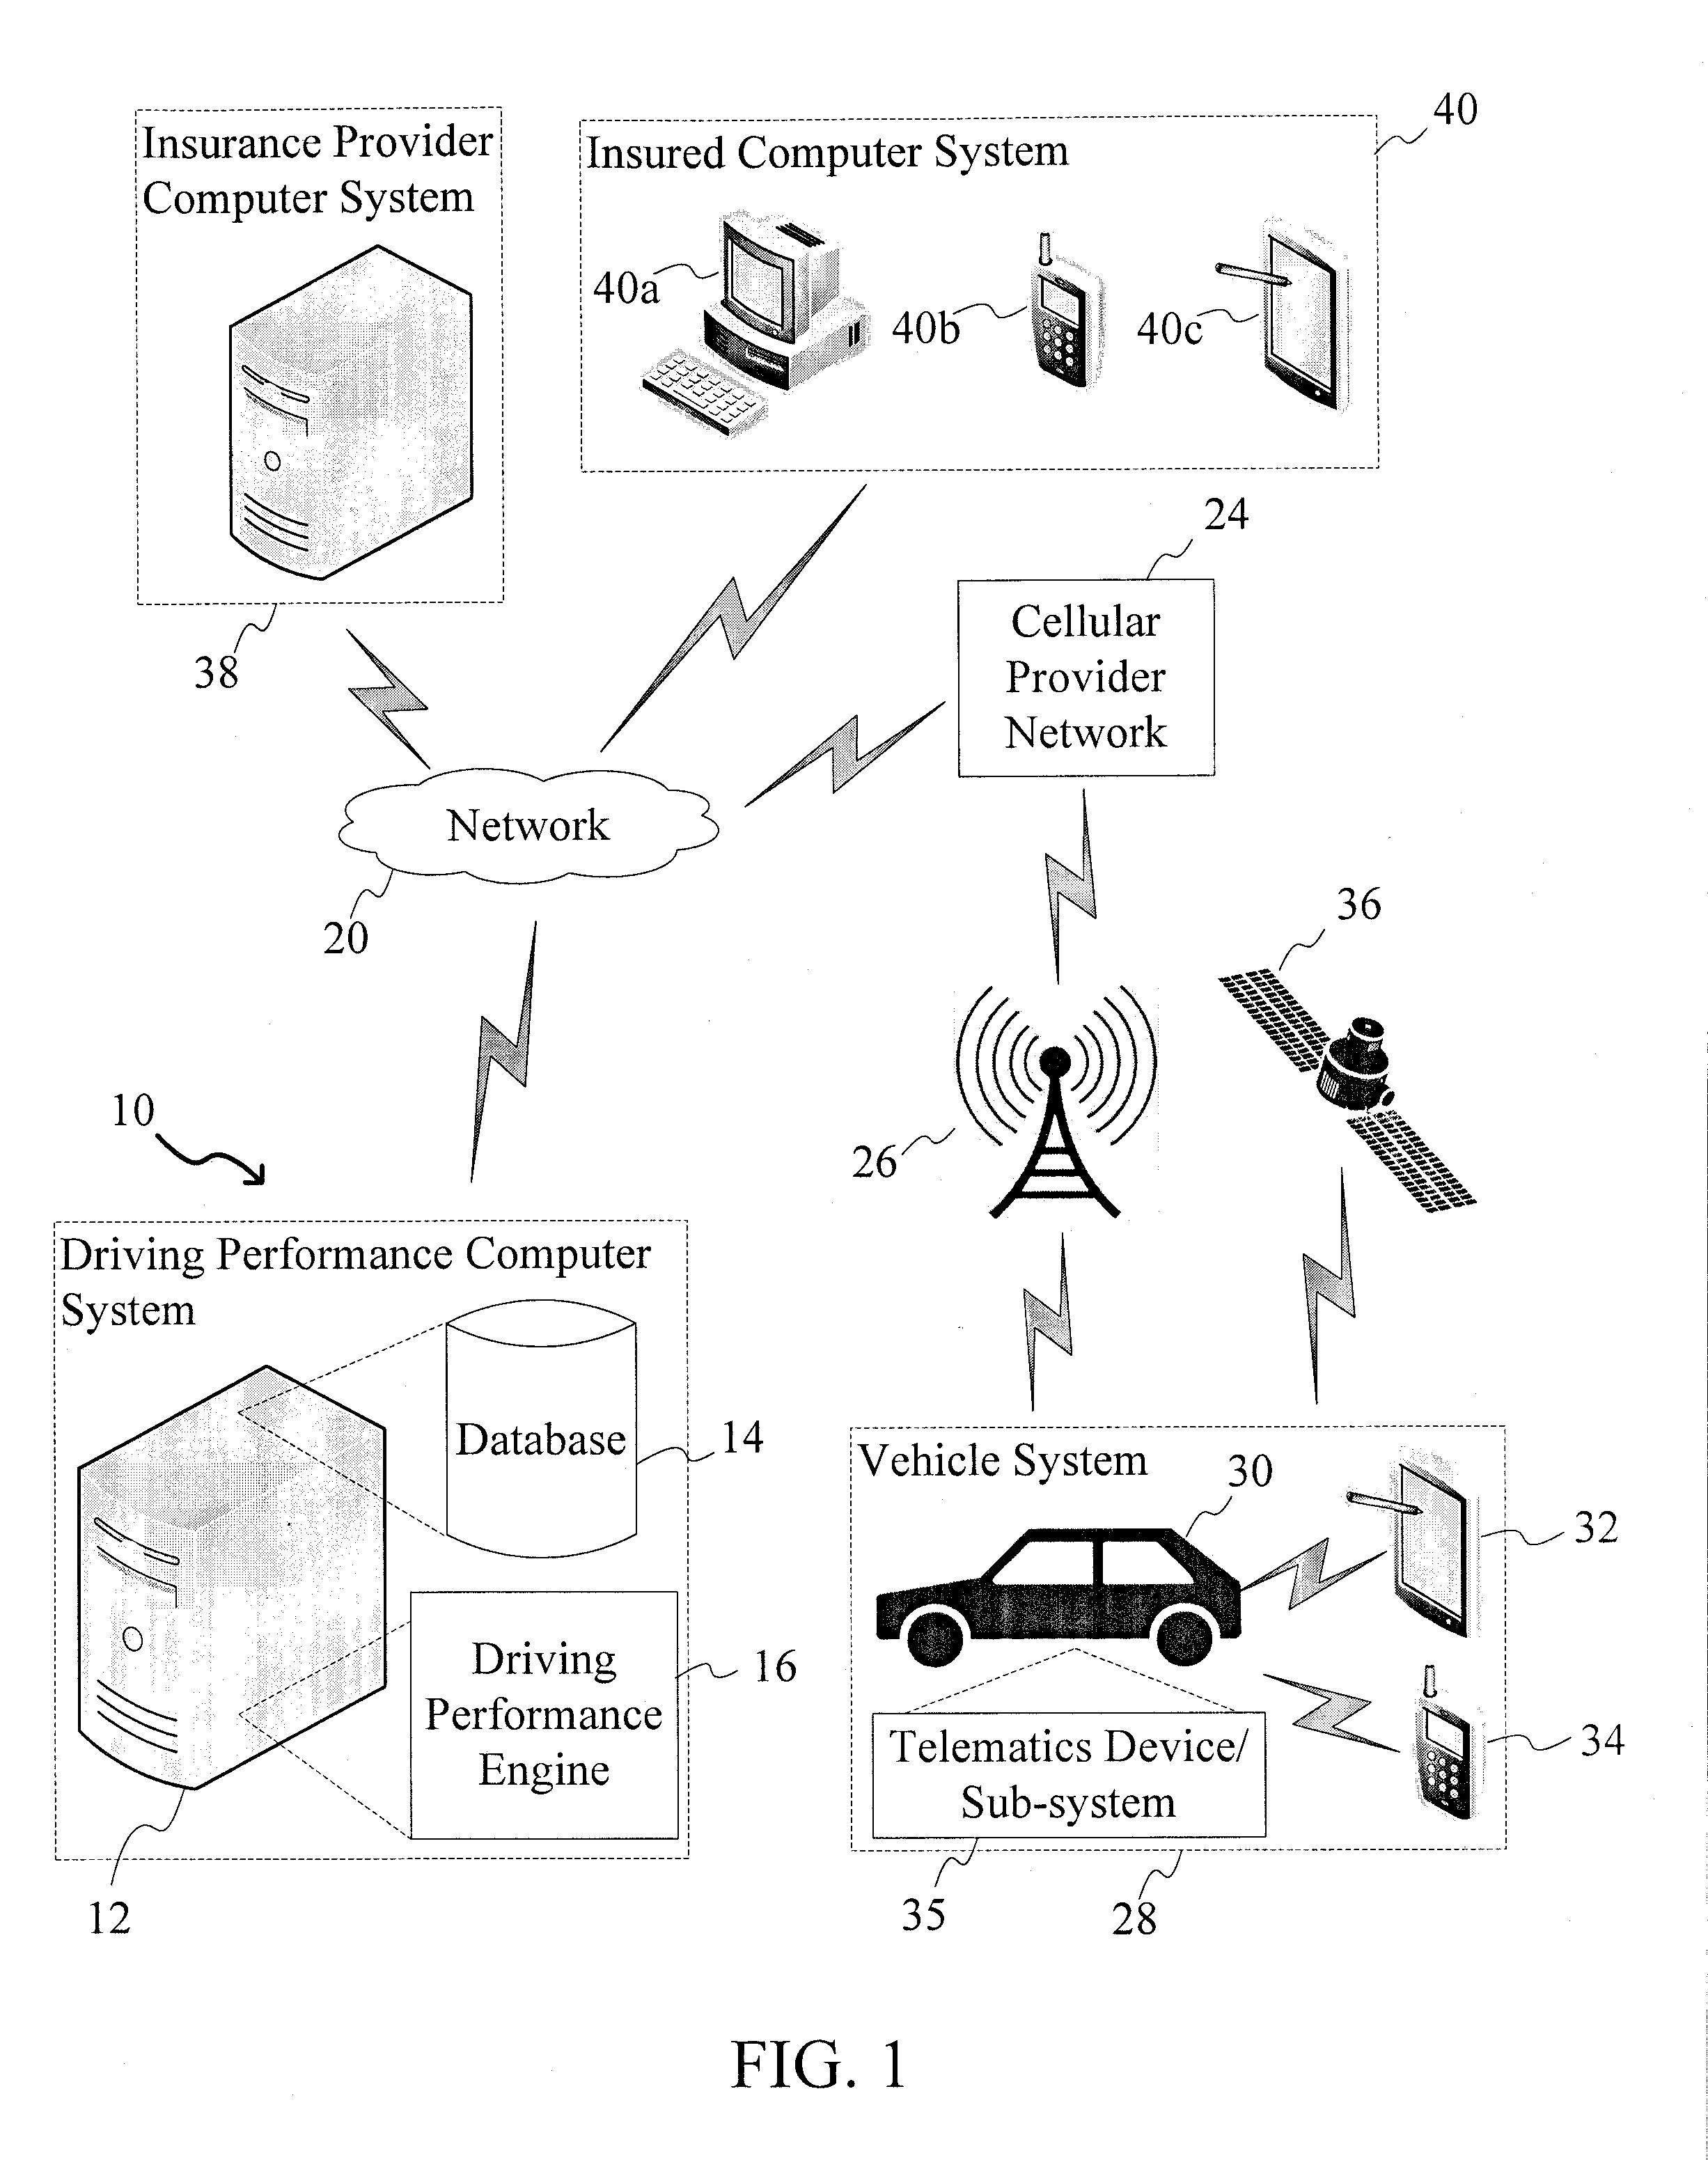 Apparatus and Method for Analyzing Driving Performance Data